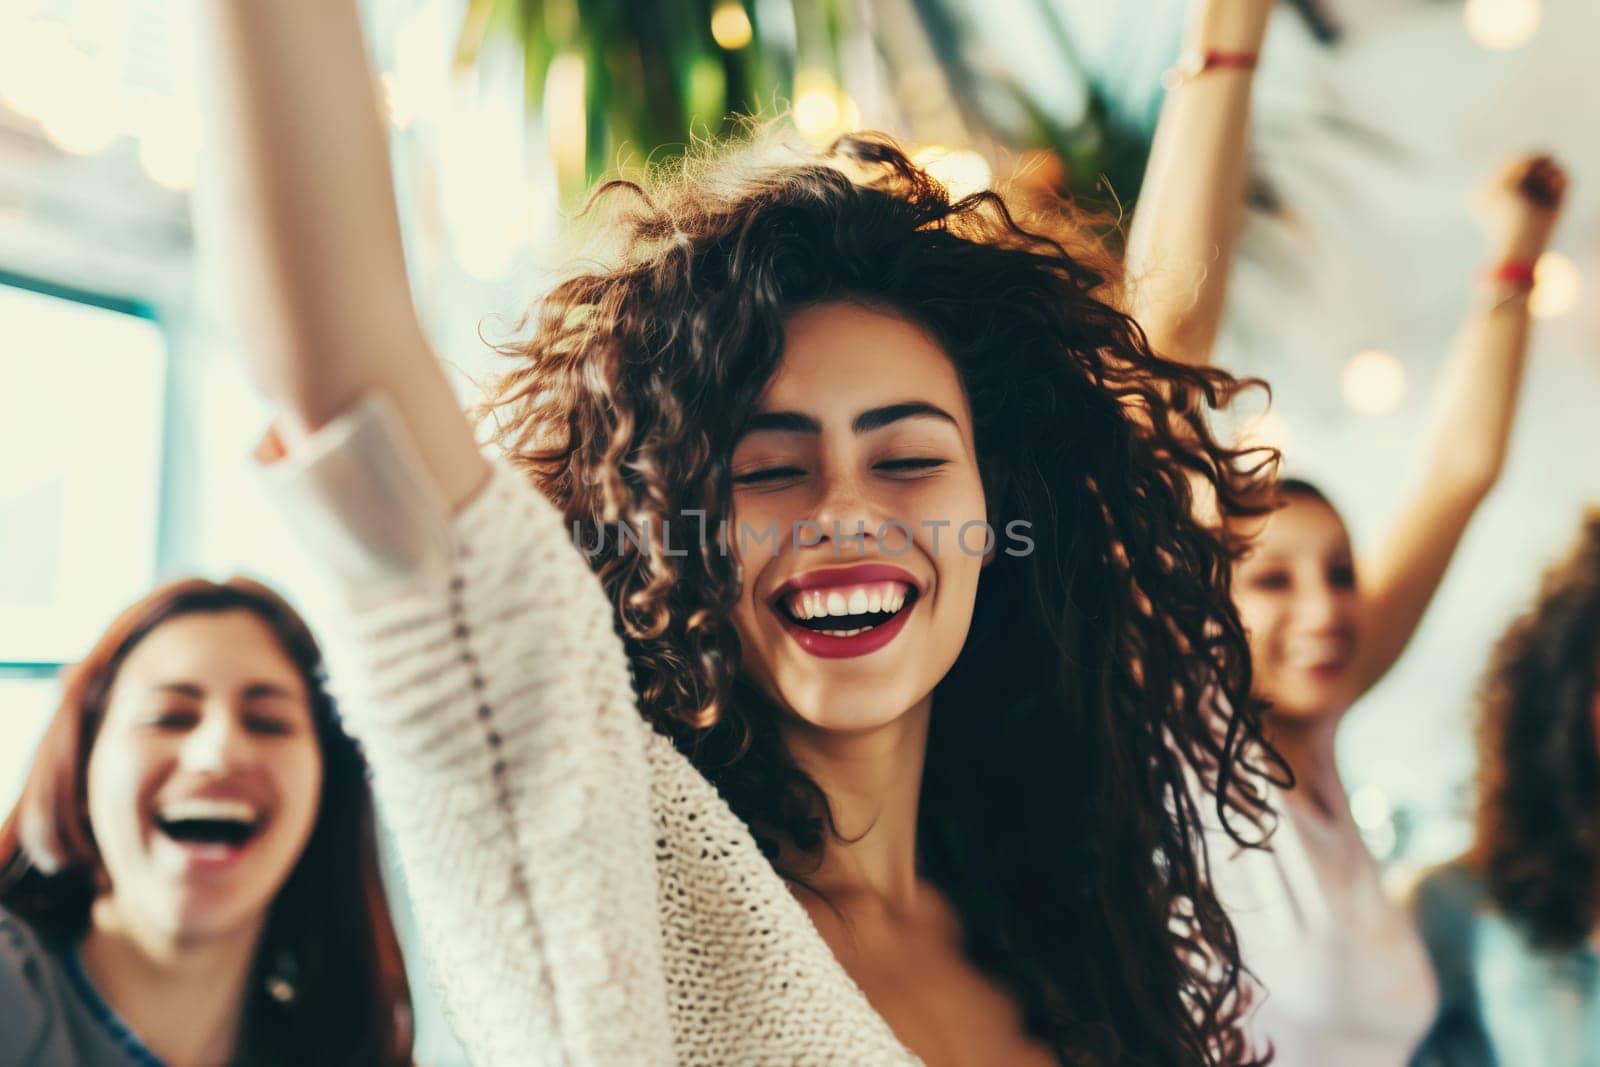 Portrait of joyful cheerful happy laughing woman having fun celebrating with her friends having a party